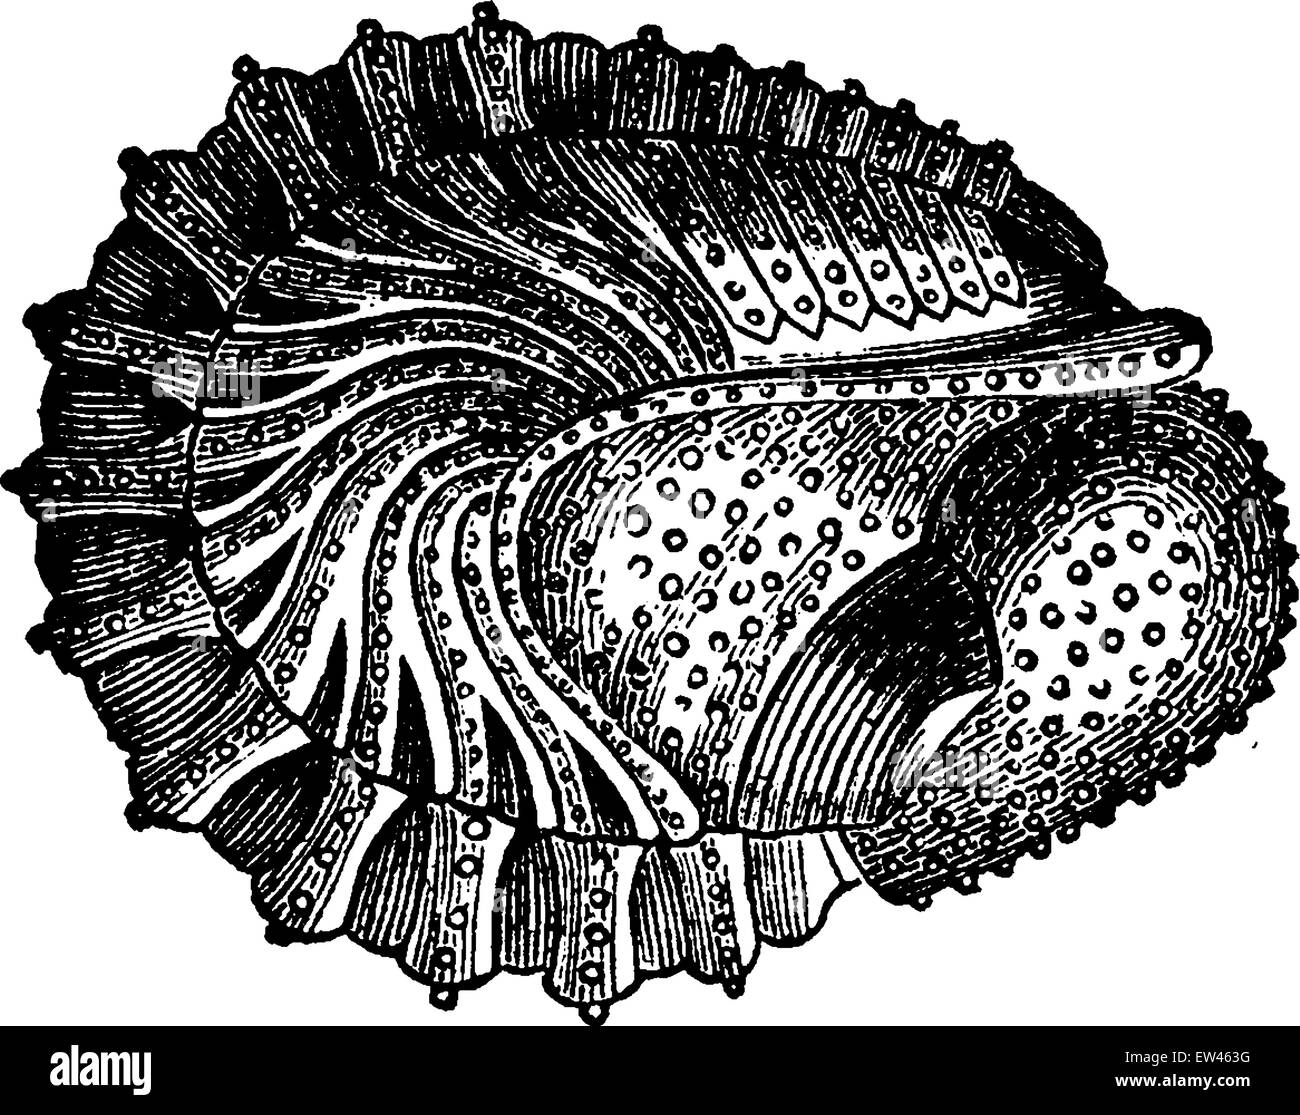 Crustaceans of the Devonian period, Phacops latifrons, Wraps, vintage engraved illustration. Earth before man – 1886. Stock Vector